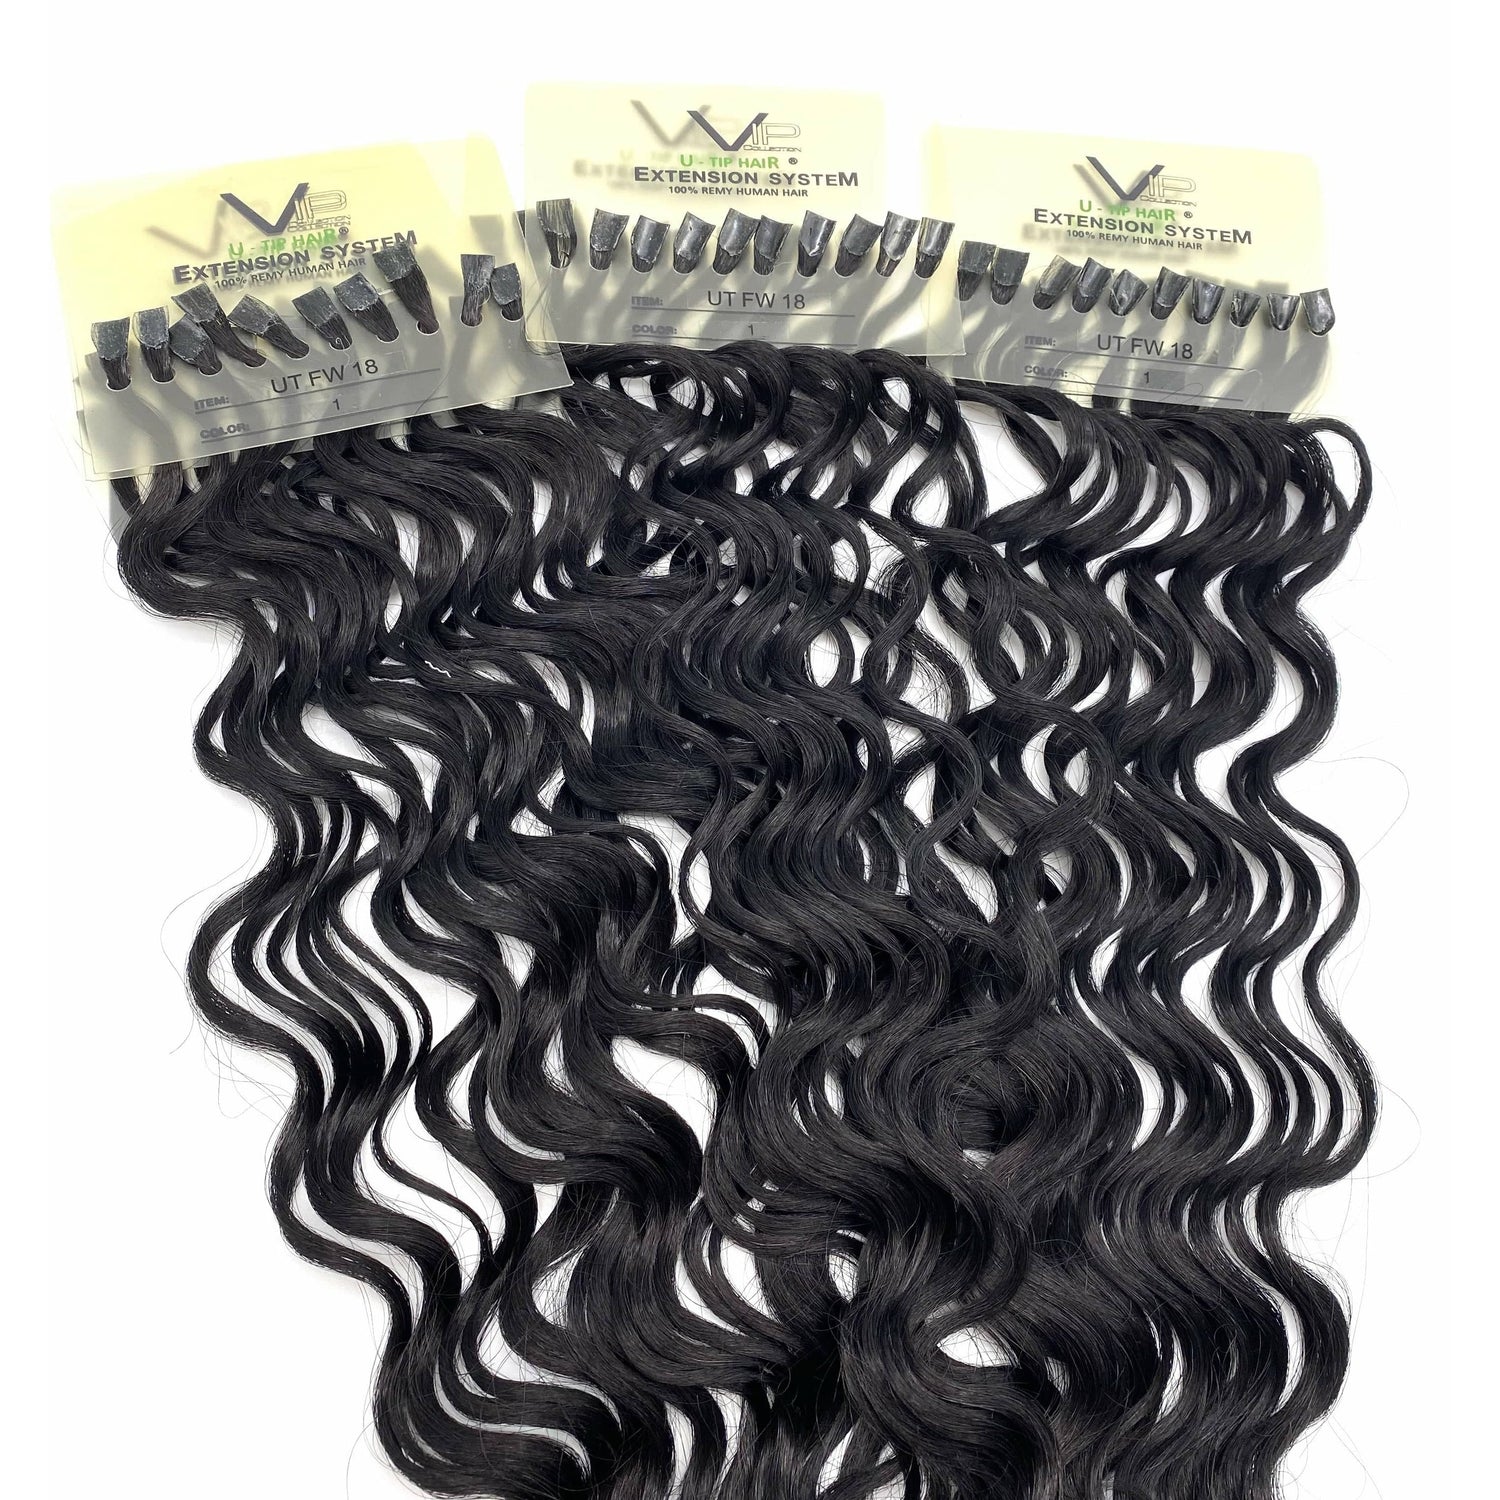 VIP U-Tip System / Curly 18" - VIP Extensions